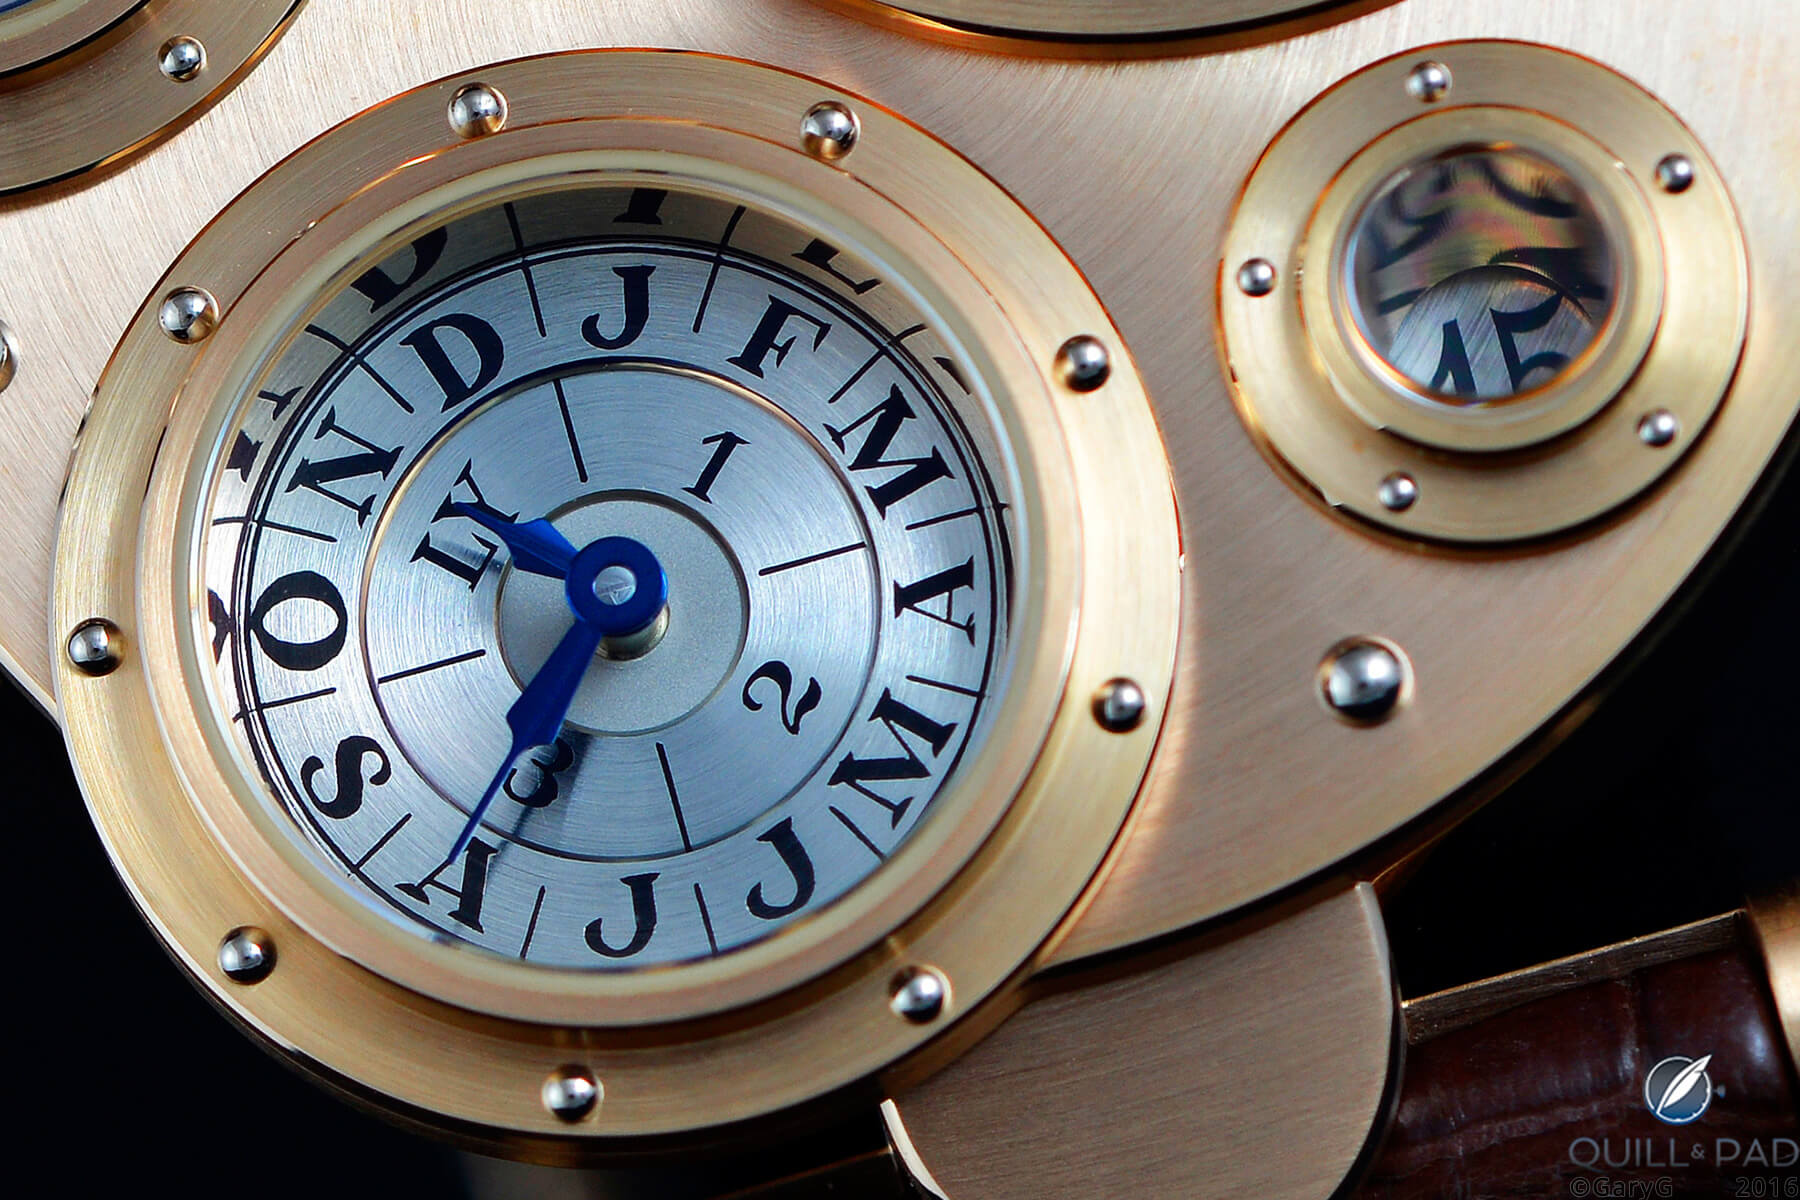 Reflects well on you: dial detail of Vianney Halter’s Antiqua showing polished flange